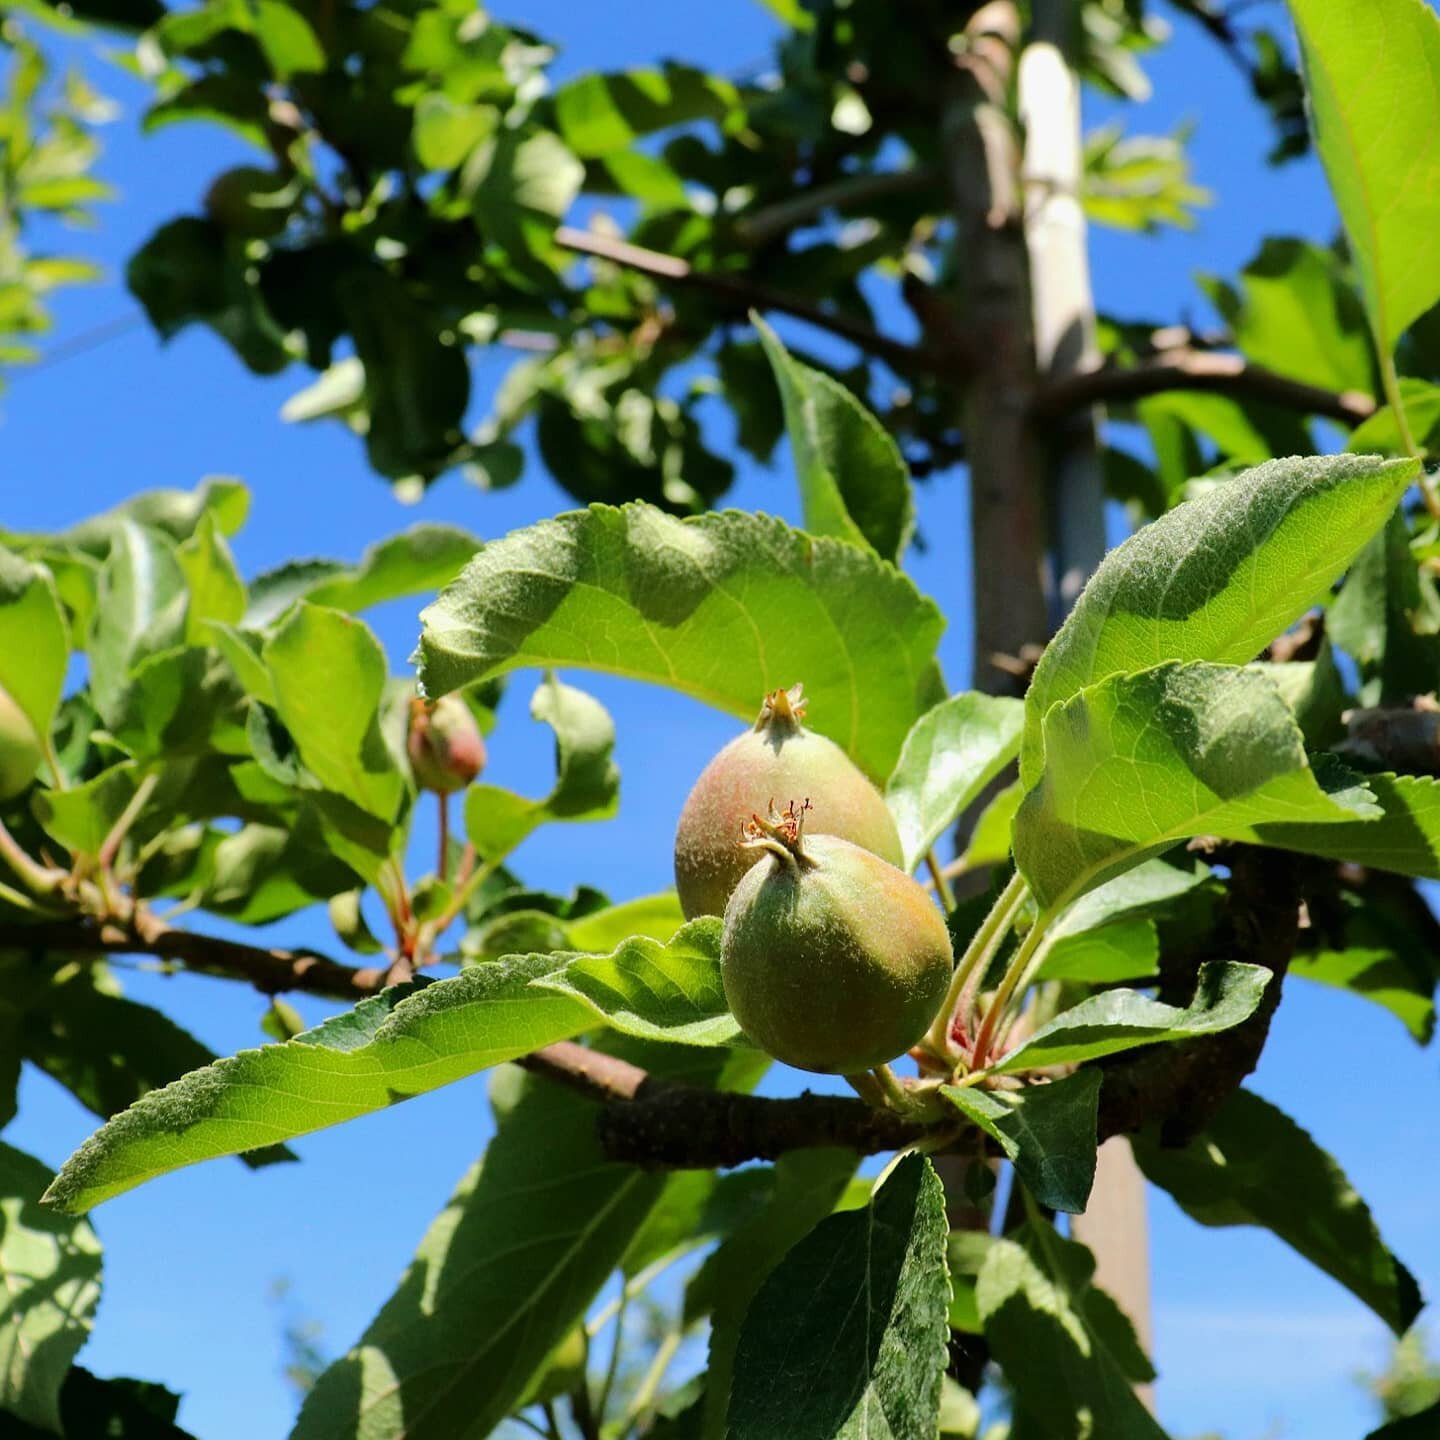 We don&rsquo;t want to brag, but our babies sleep through the night, and they are never crabby! Check out these sweet little (type) apples that are just starting to show on our trees. Won't be long until they're full grown and moving out!
.
.
.
#Appl